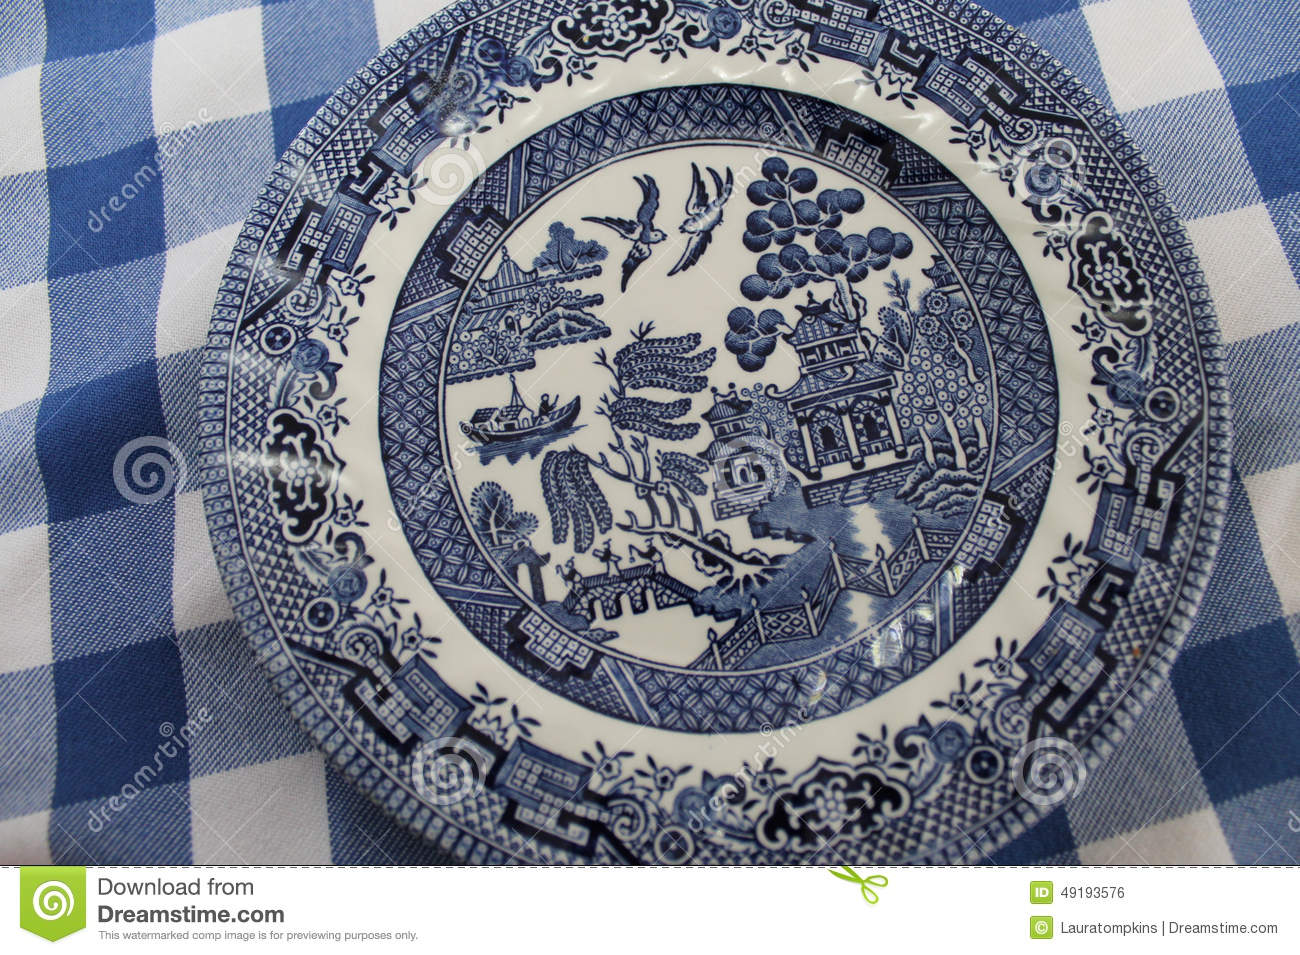 Classic Old Blue Willow China Plate On A Blue And White Tablecloth